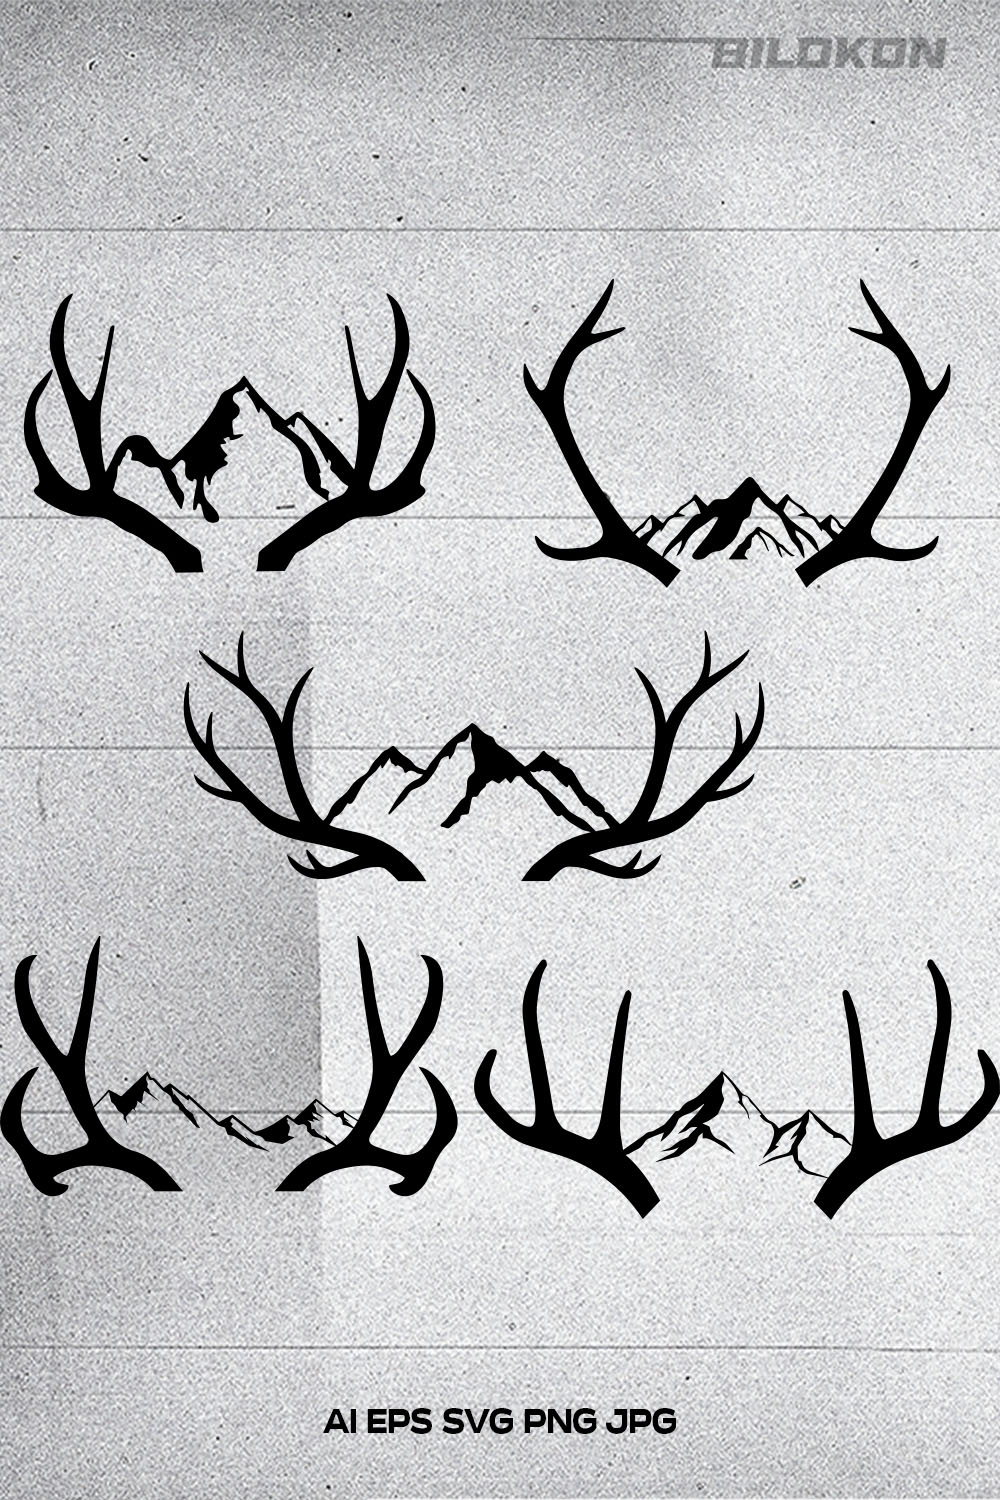 Bunch of deer antlers with mountains in the background.